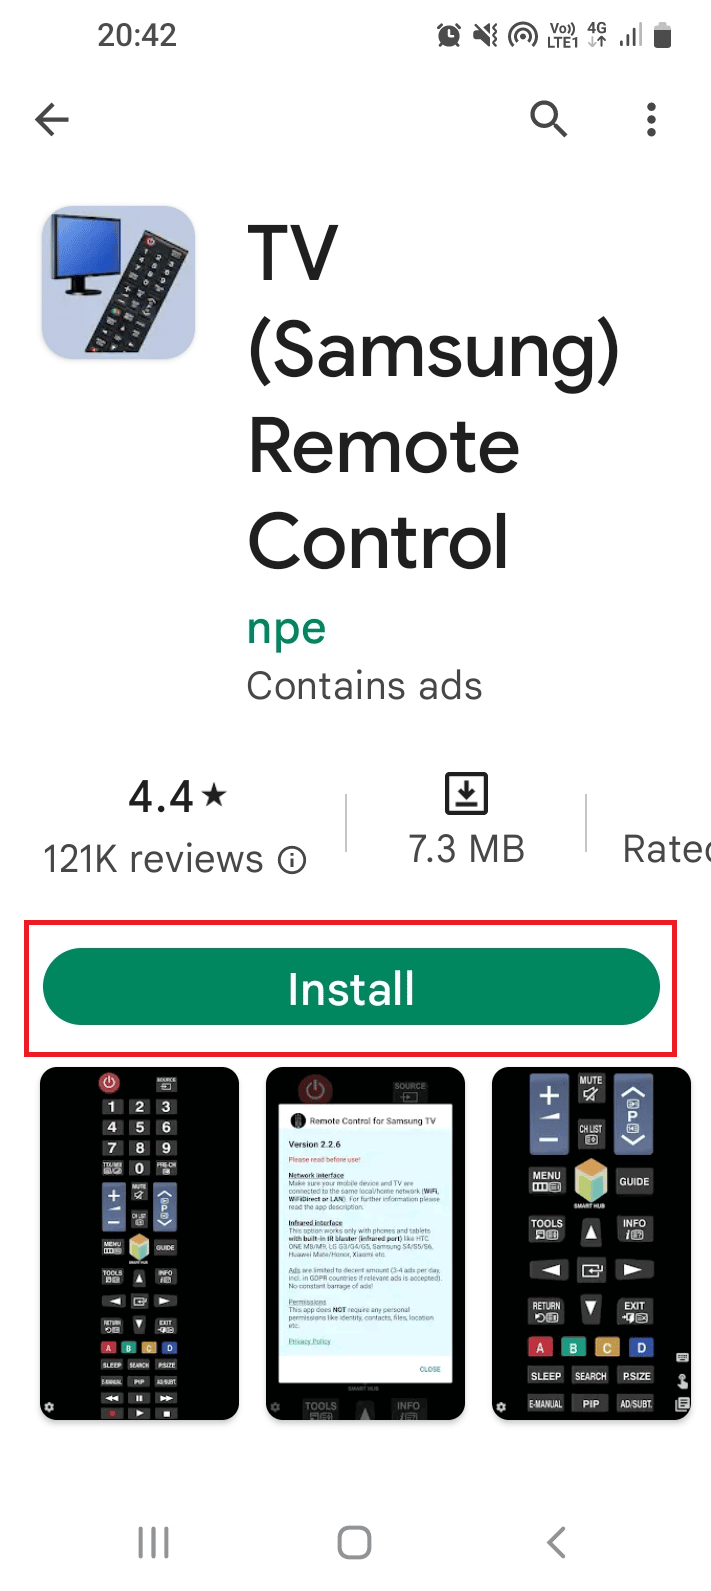 Tap on the Install button on the TV Samsung Remote Control app